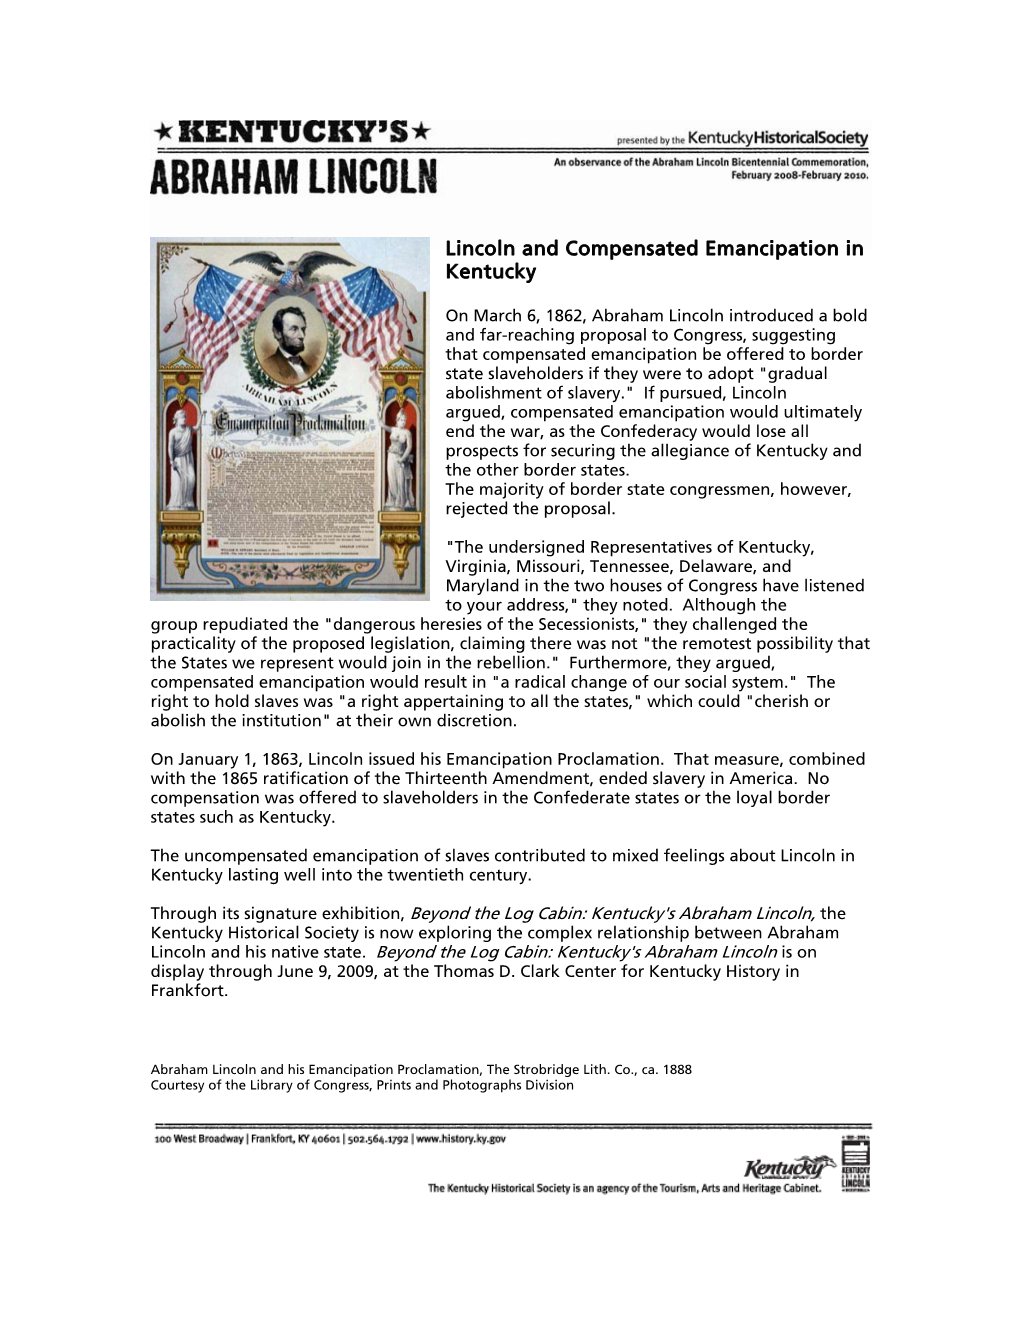 Lincoln and Compensated Emancipation in Kentucky